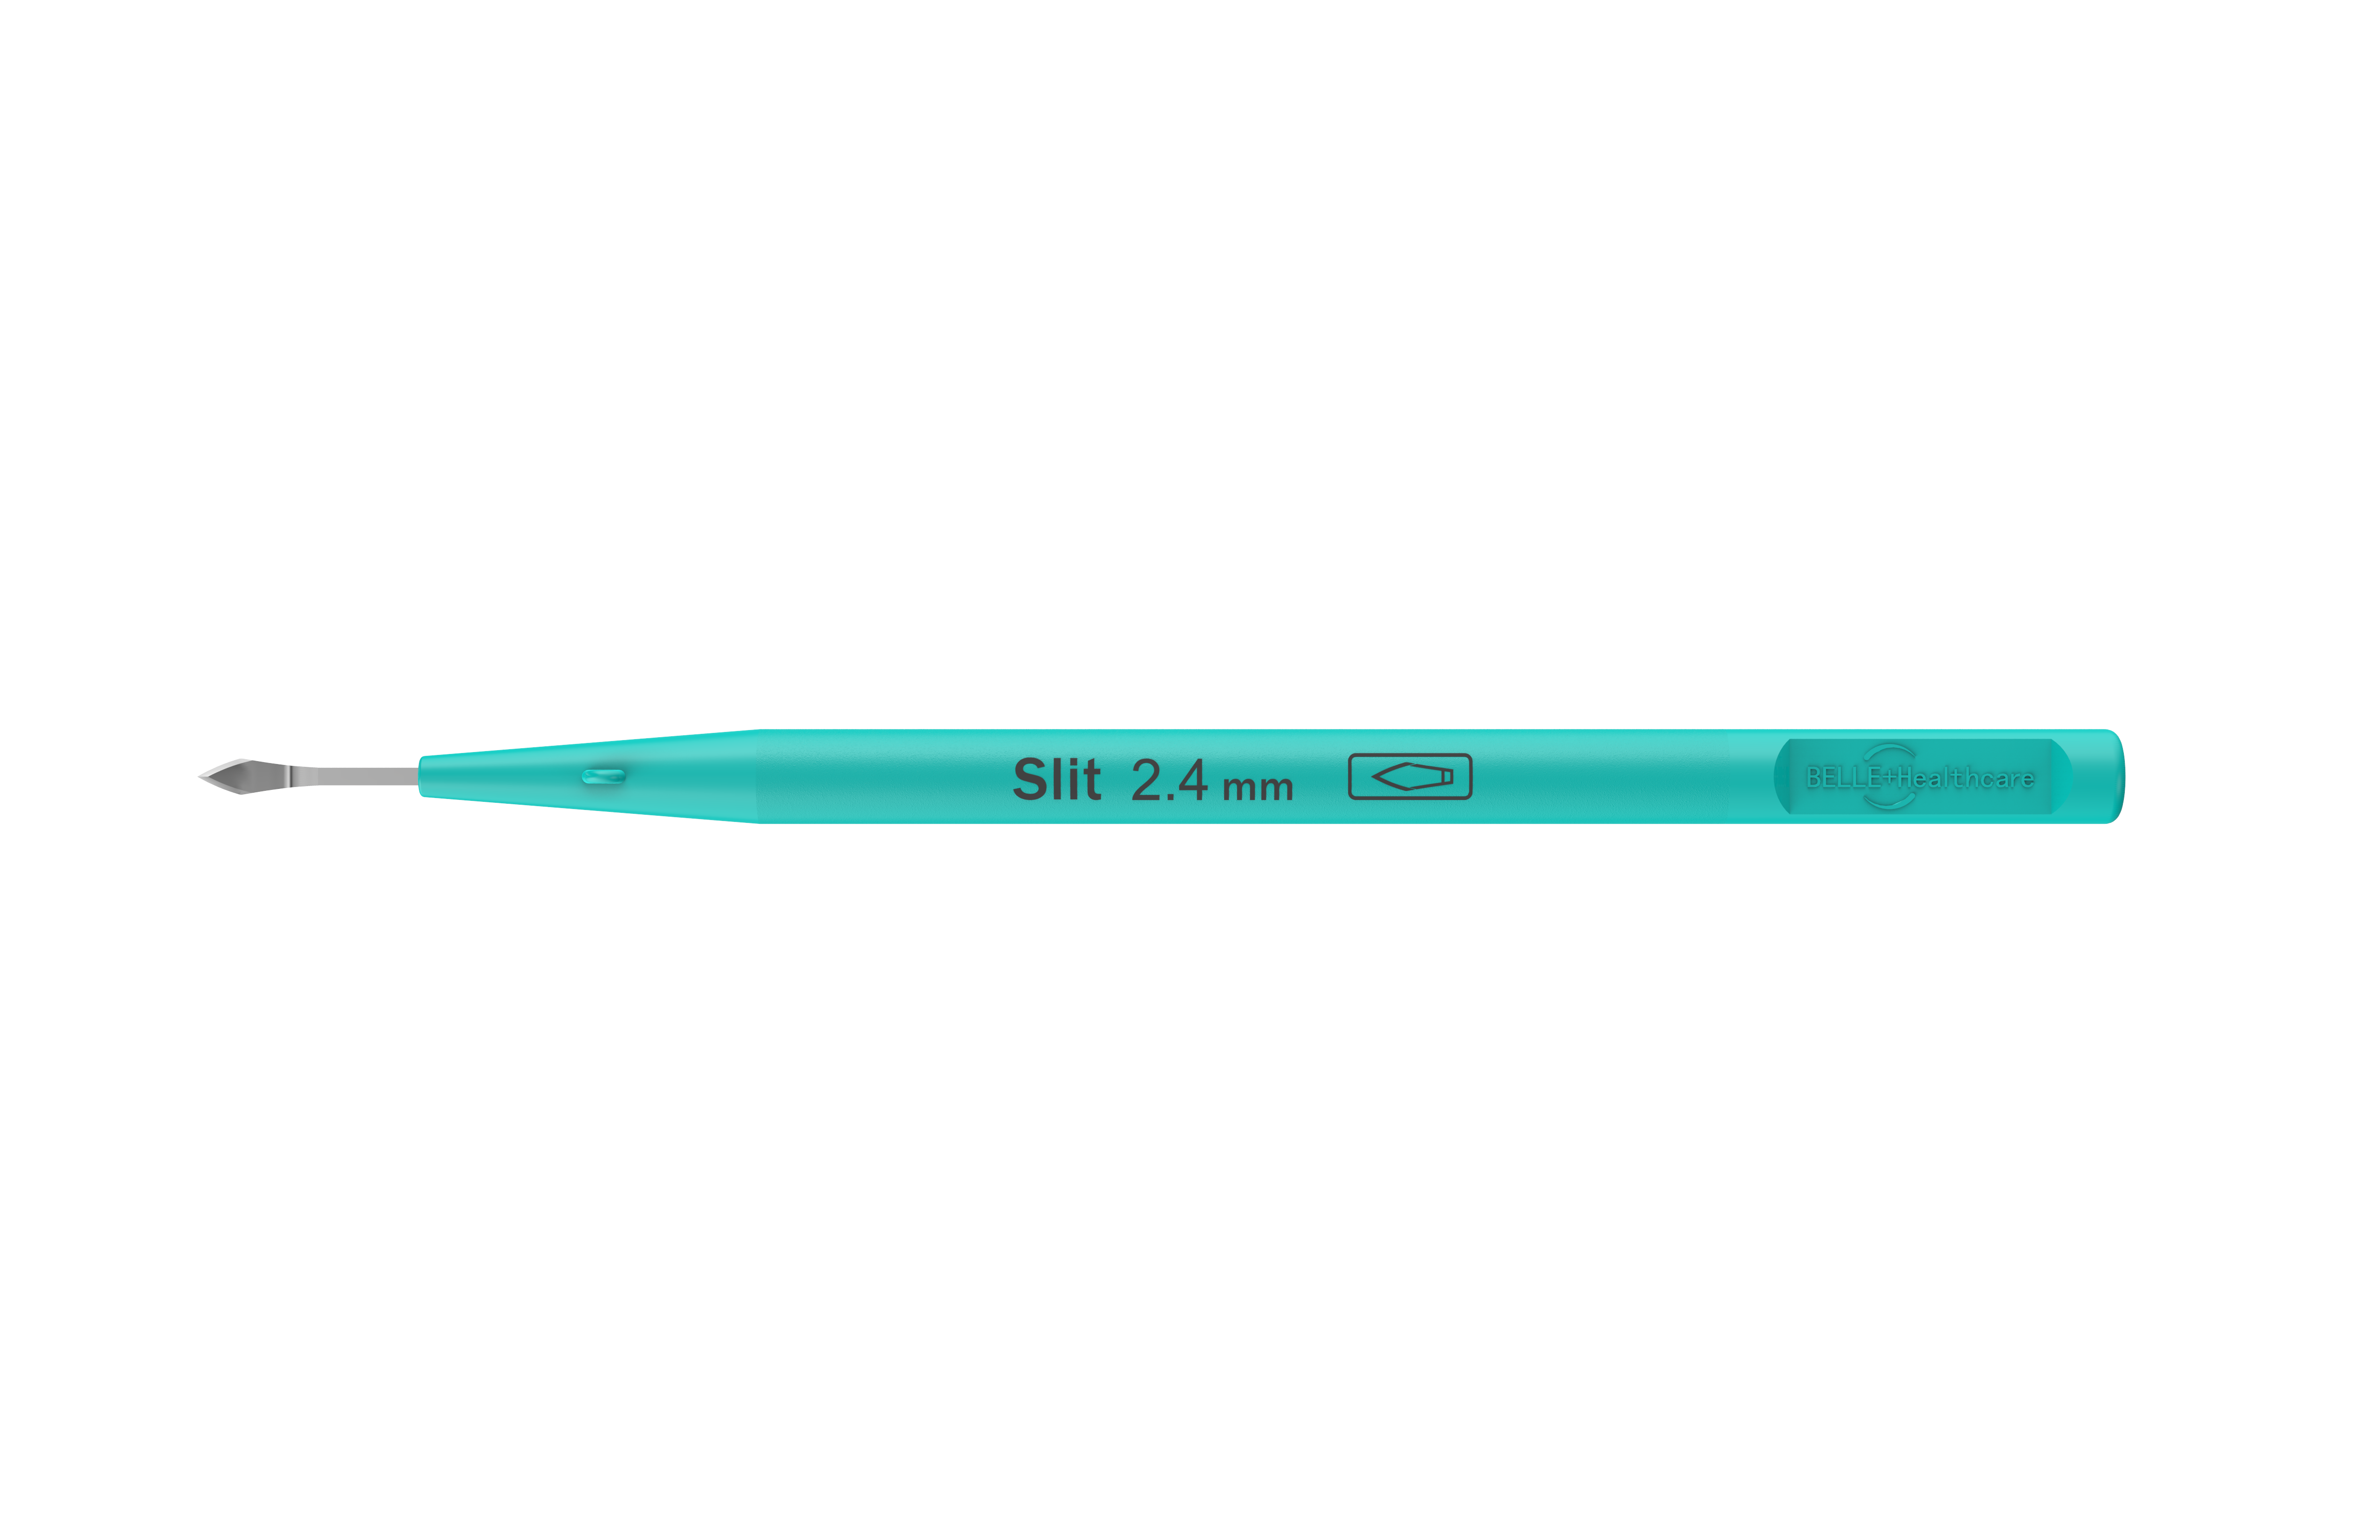 BK-1240B Disposable Ophthalmic Knives